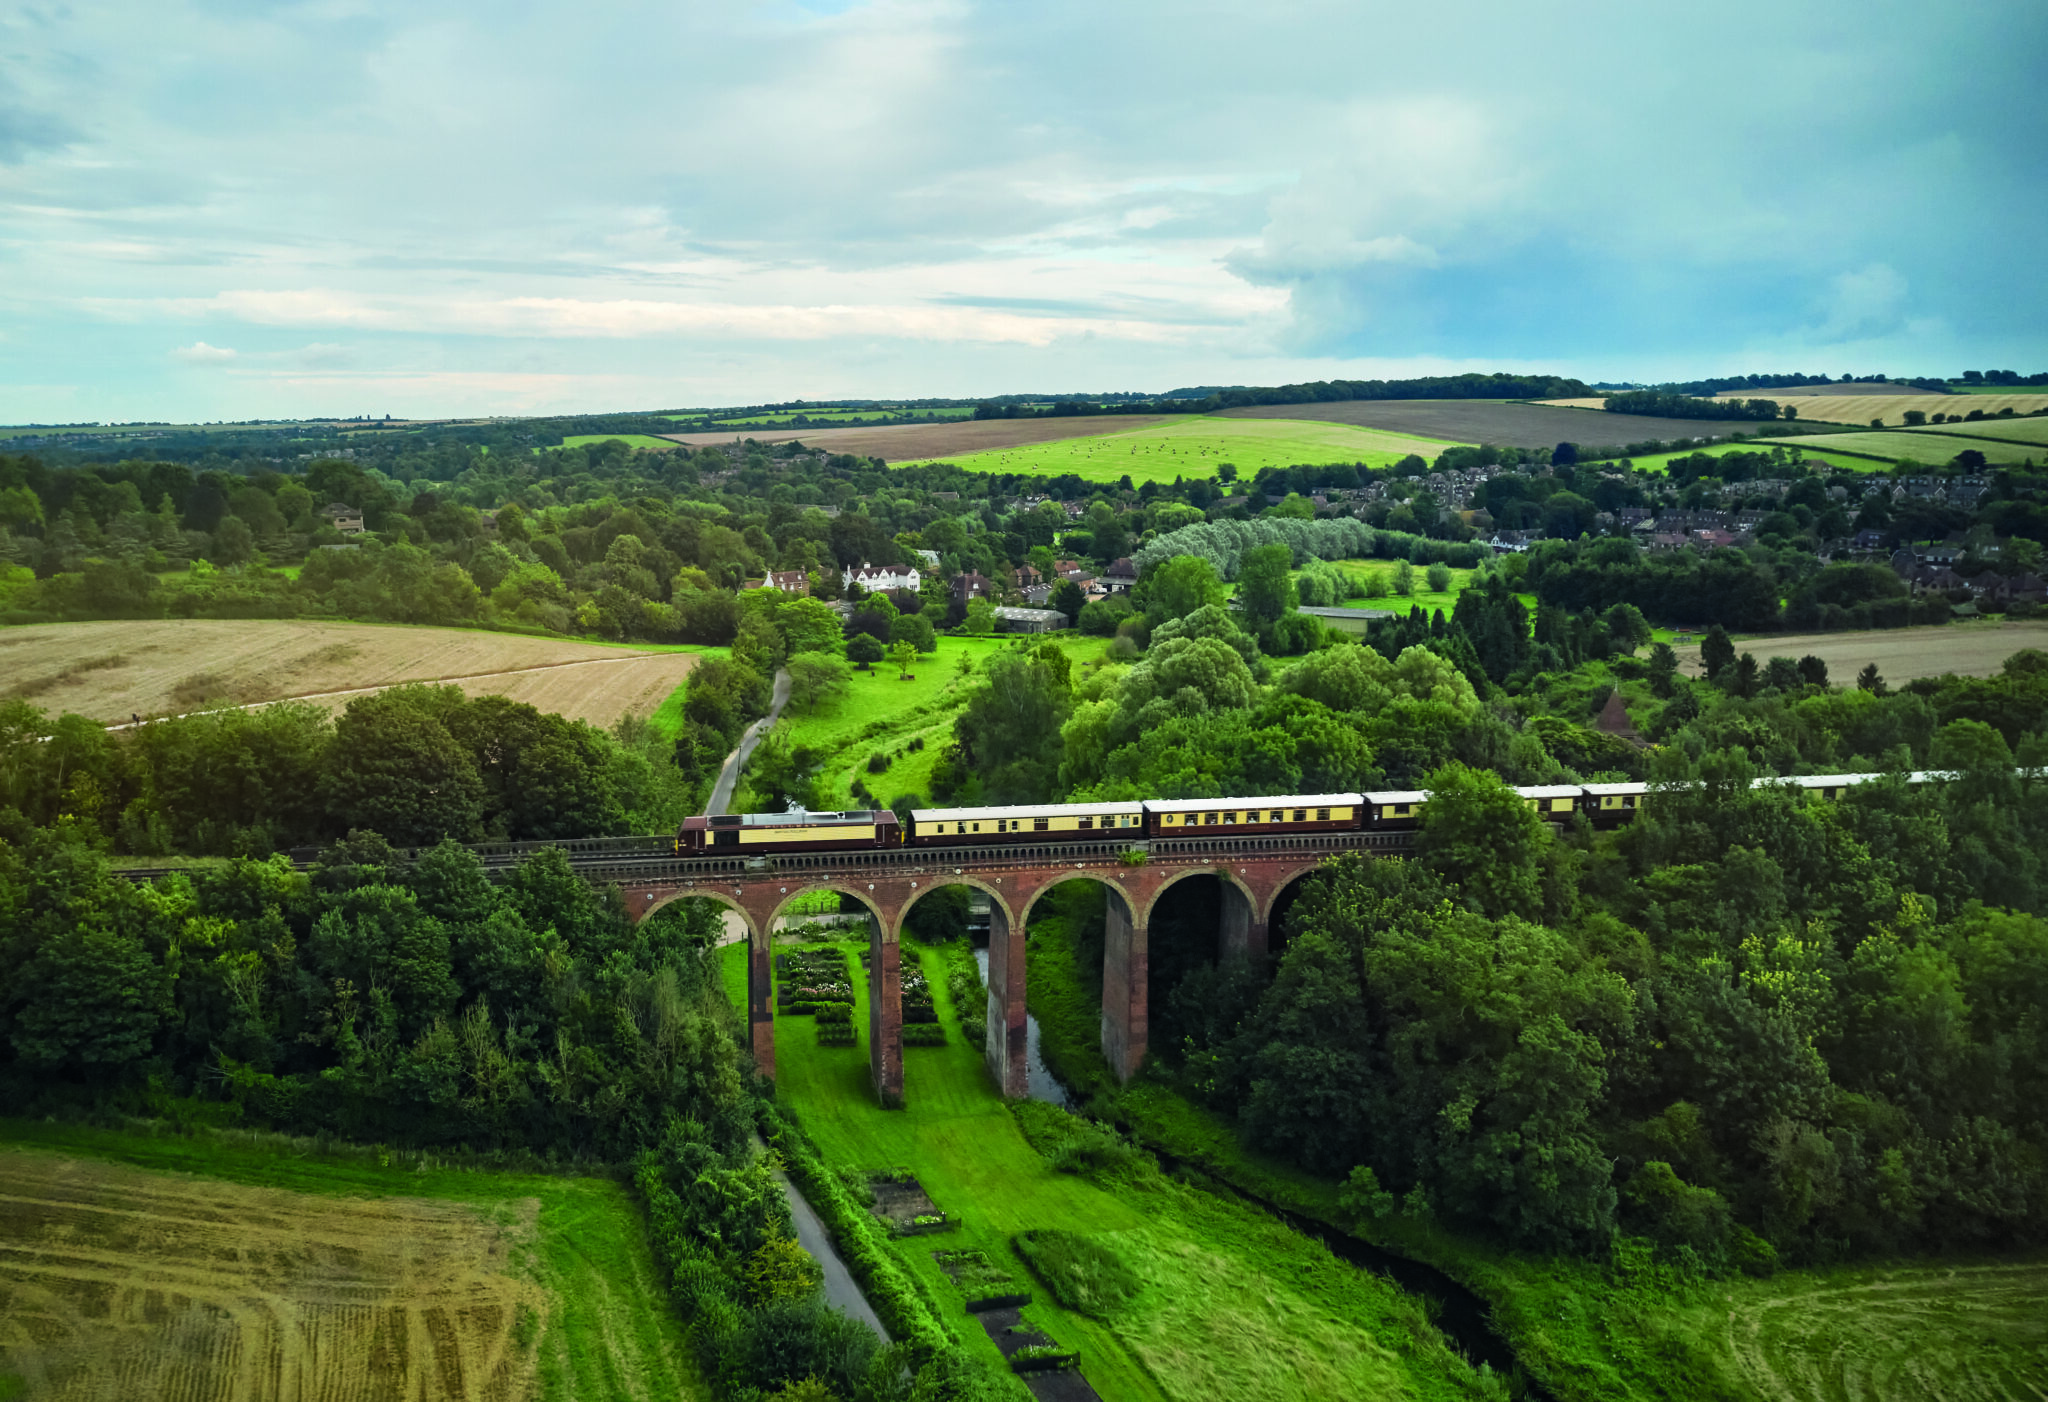 The British Pullman crossing through the British Countryside